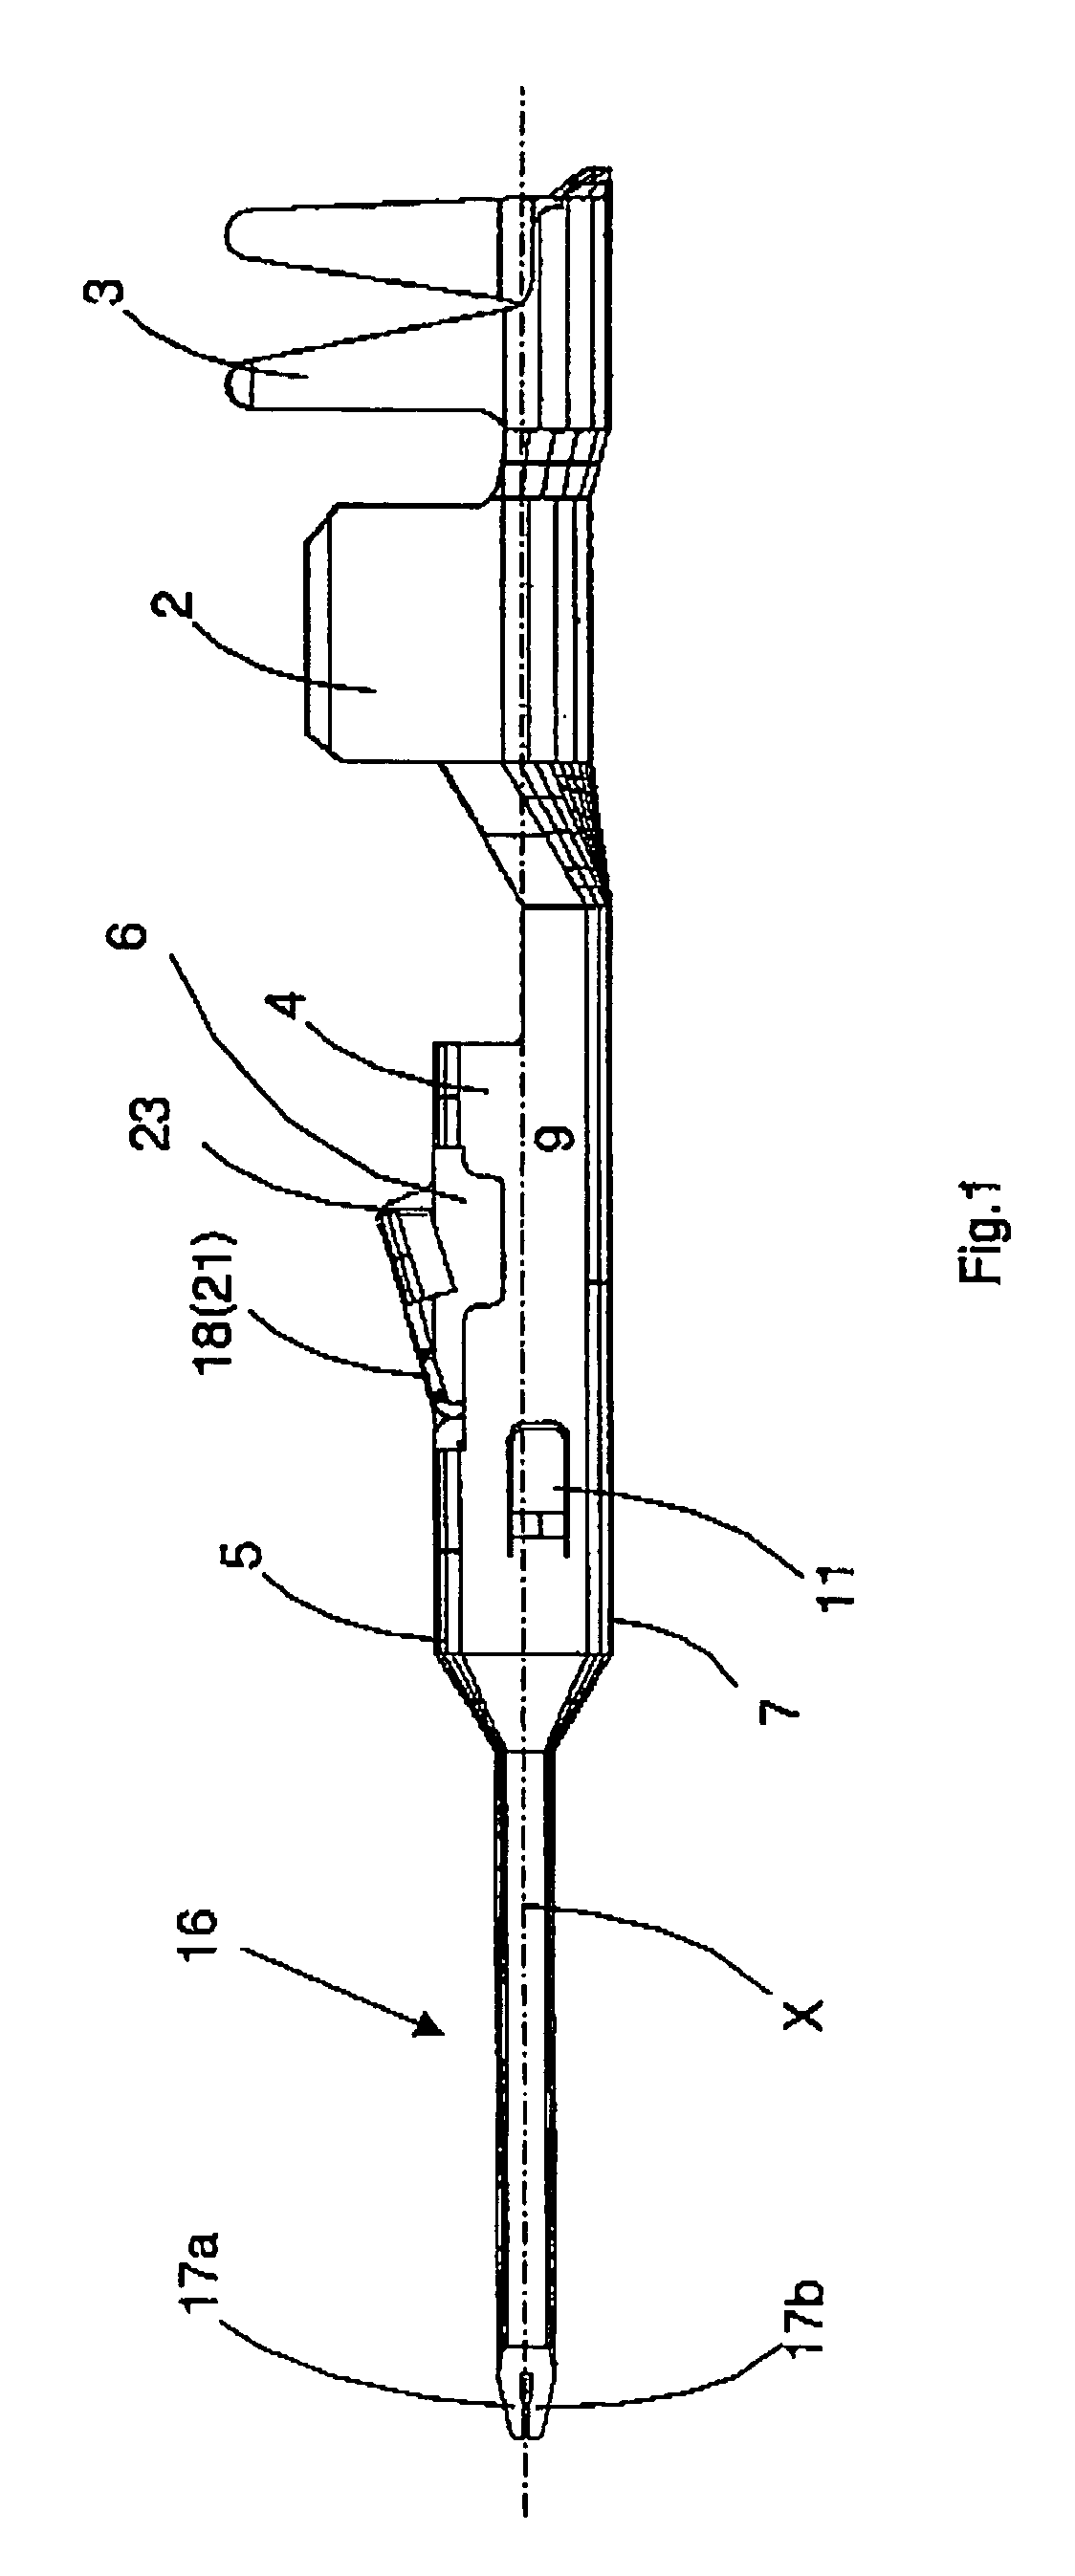 Electrical contact element